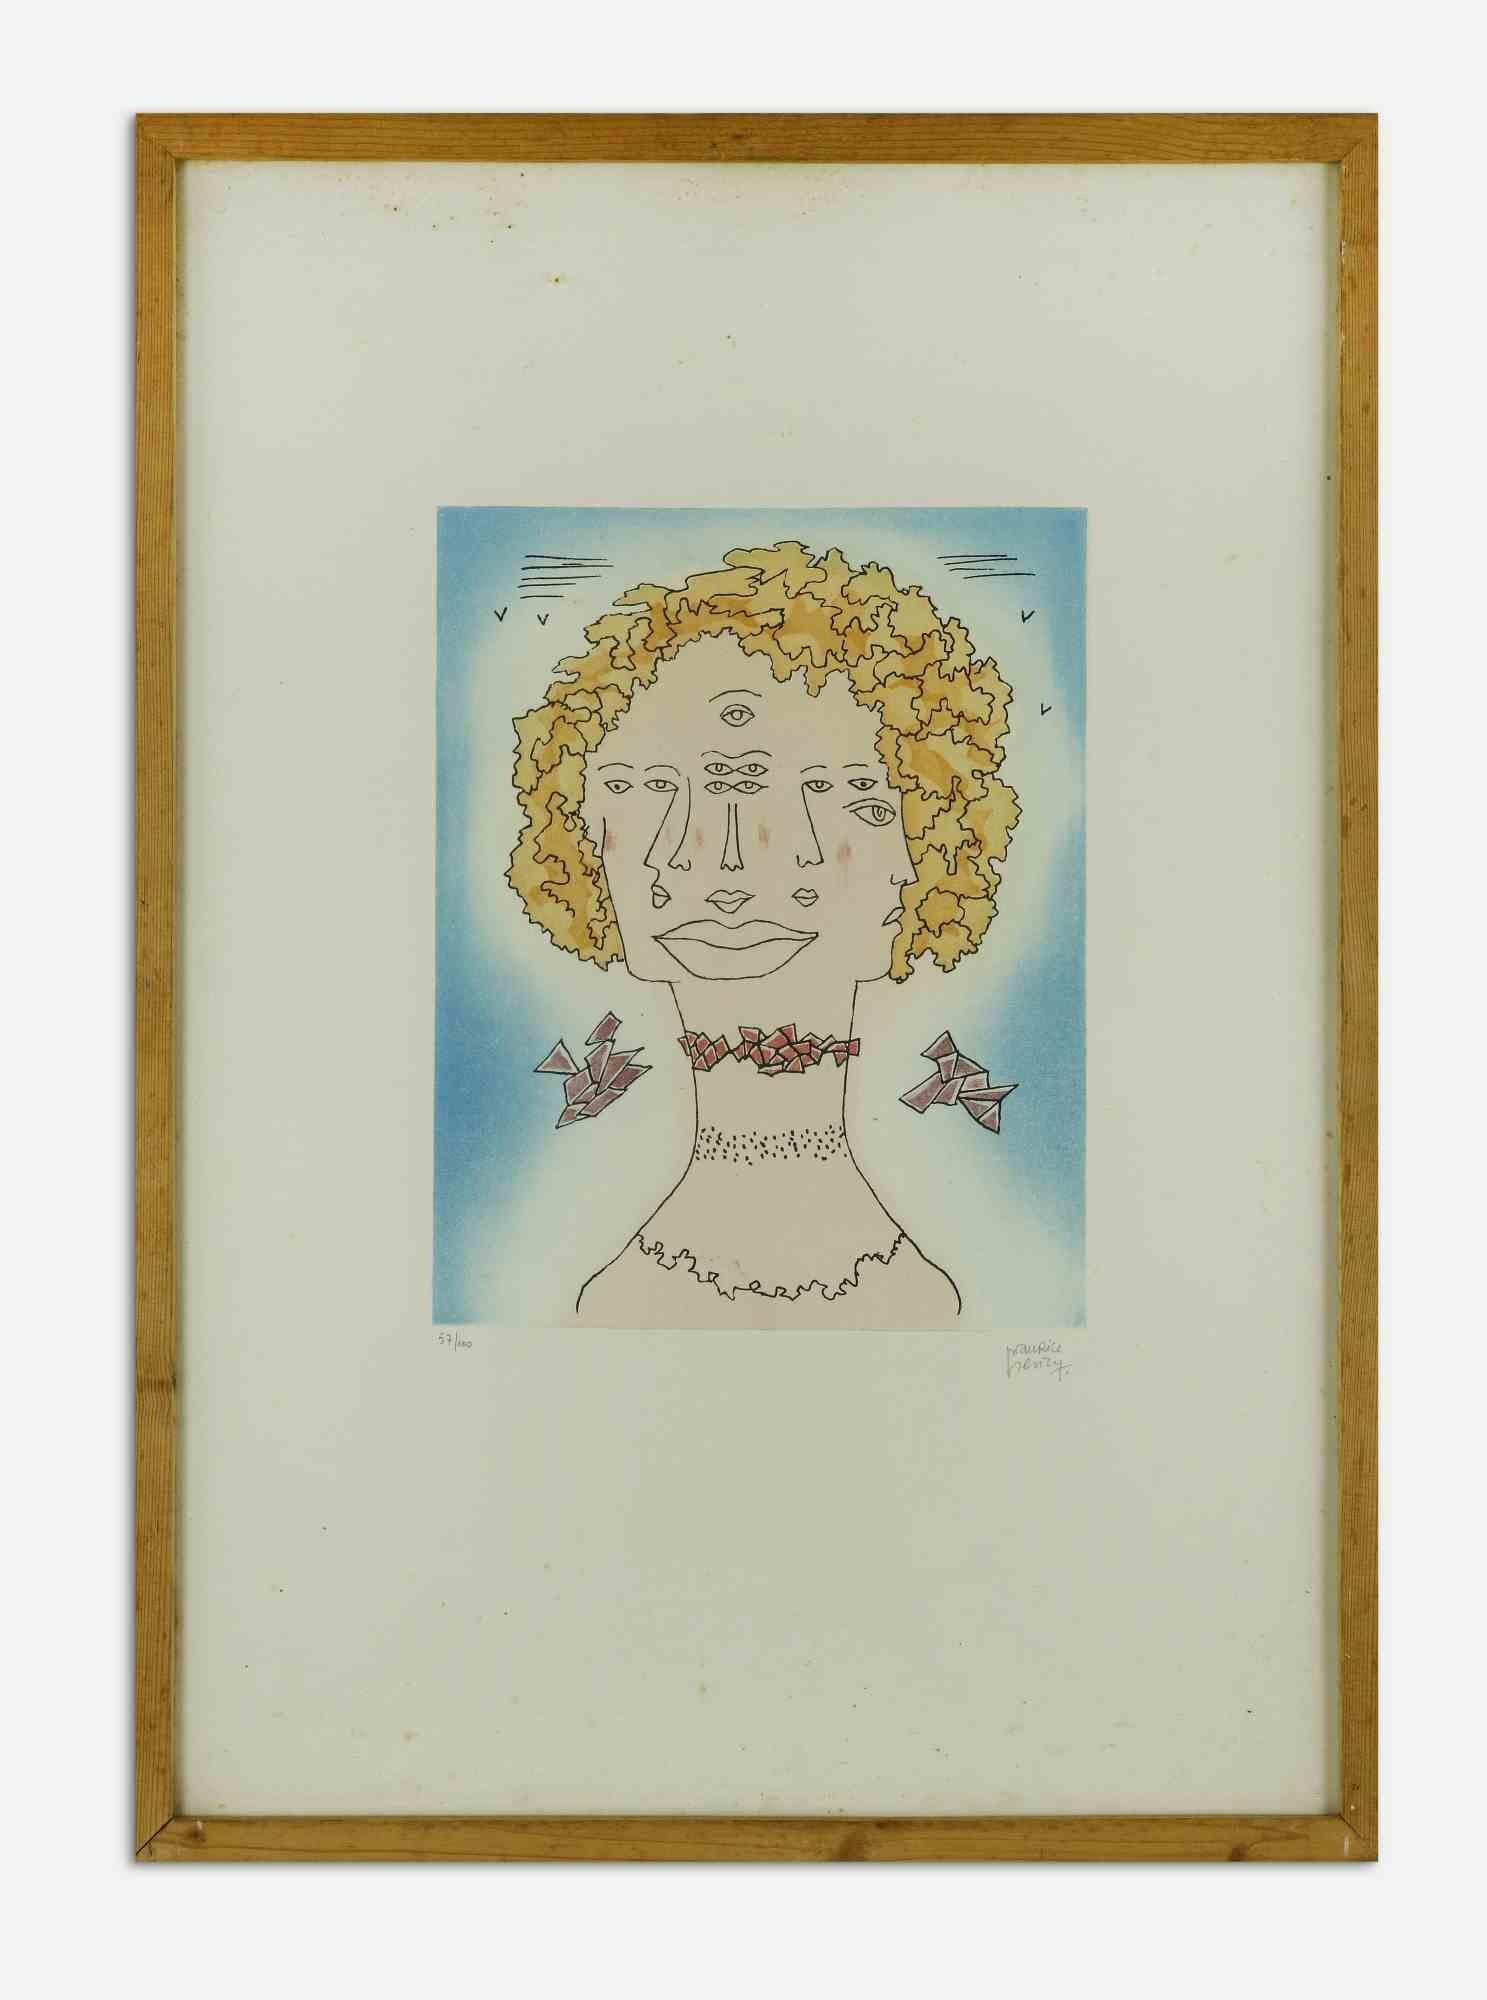 Face is a modern artwork realized by Maurice Henry in 1970s.

Mixed colored lithograph.

Hand signed and numbered on the lower margin.

Edition of 57/100

Includes frame: 73 x 2.5 x 53